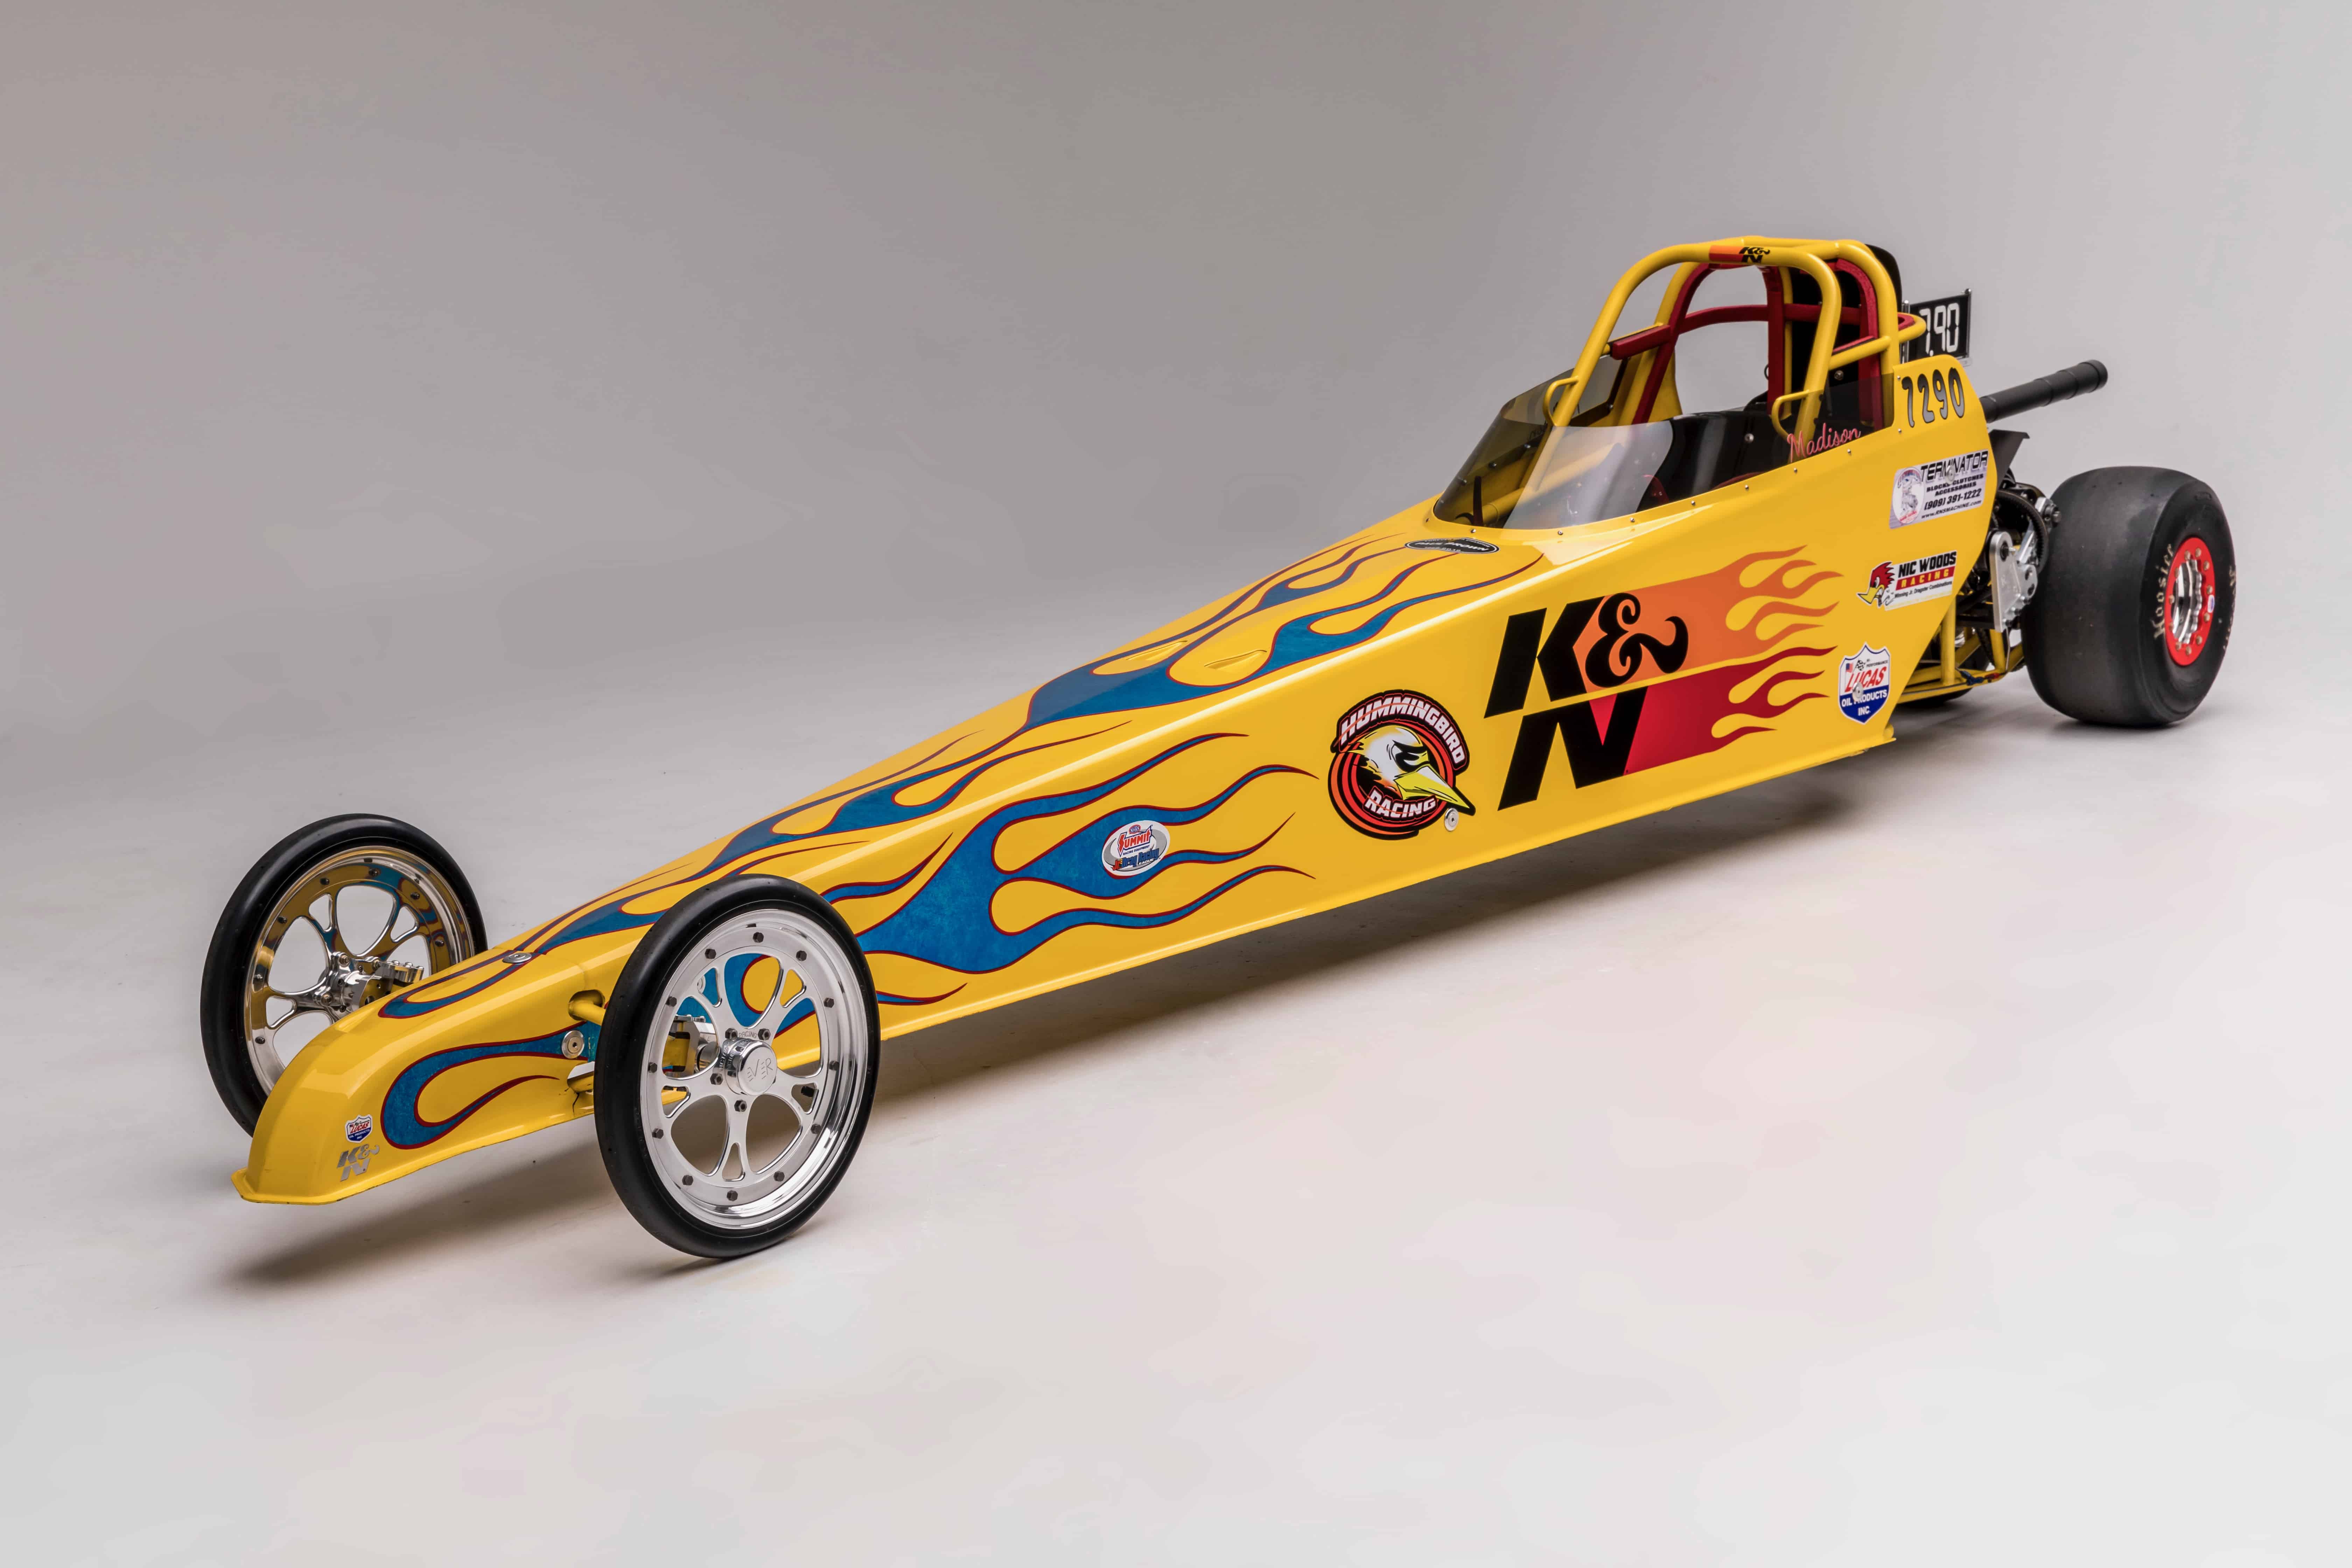 New America on Wheels exhibit made for kids of all ages | ClassicCars